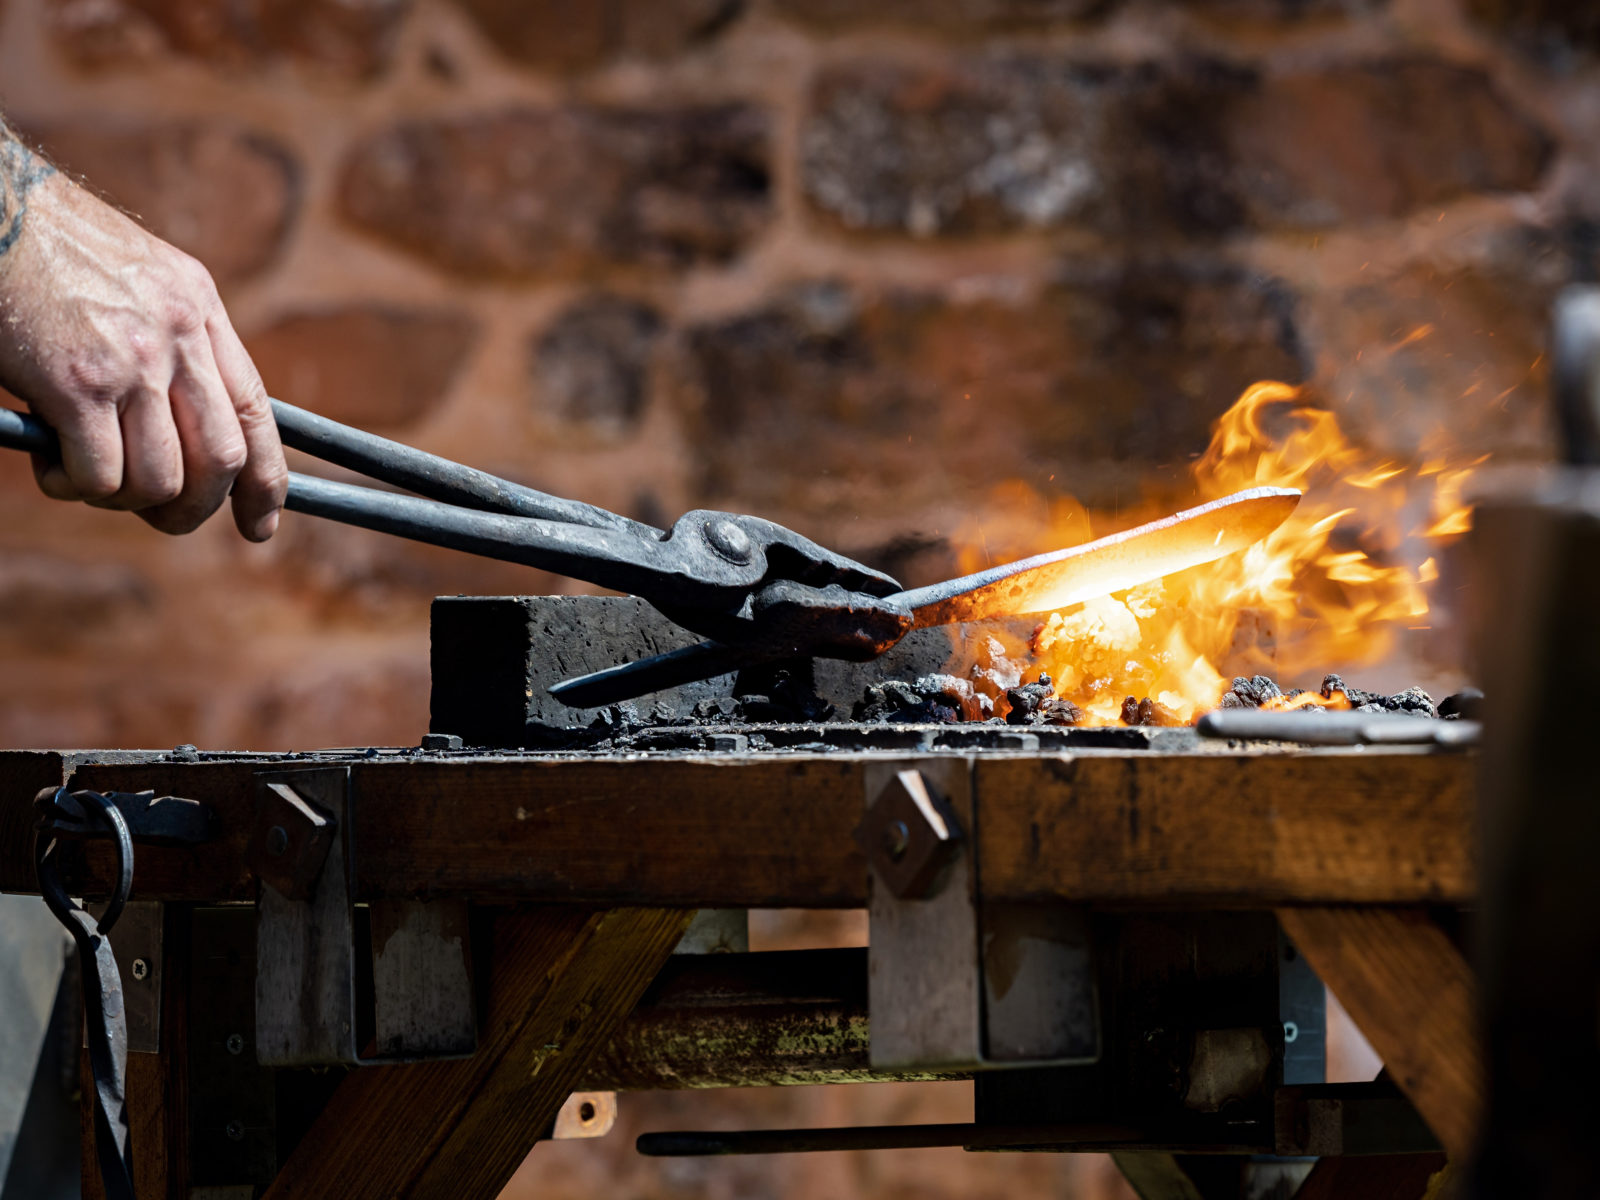 Authentic blacksmith forges metal on the anvil. Medieval traditions